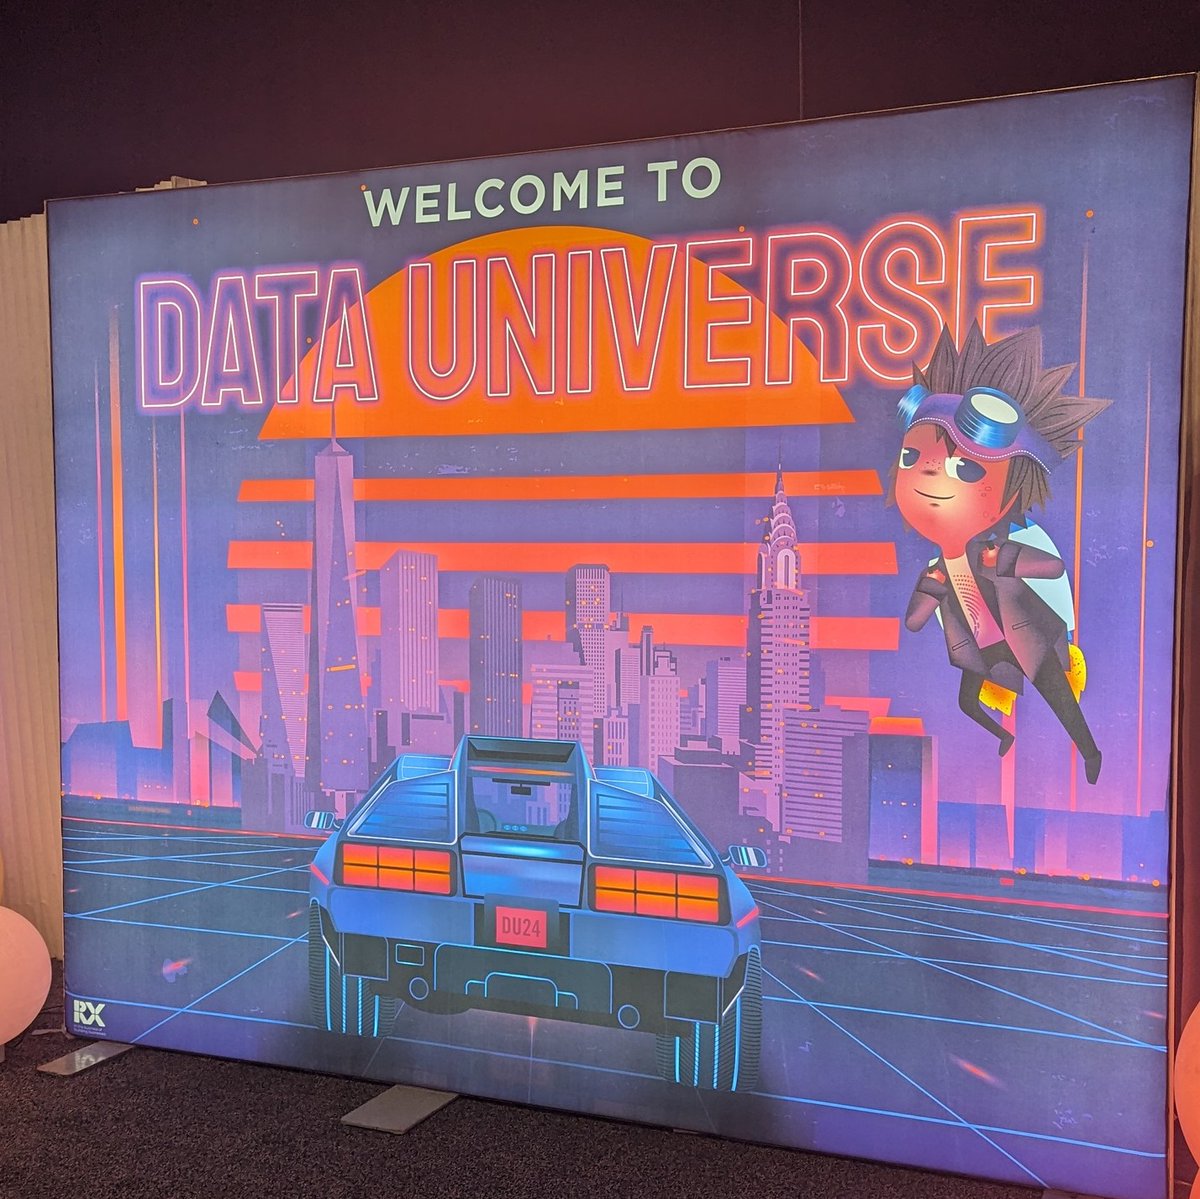 Today we're at Data Universe in NYC, and at 1:30, our CTO Jeff Reihl will take the stage to discuss #LegalAI and digital transformation! Follow along here or drop by in person to check it out at #DataUniverse2024!